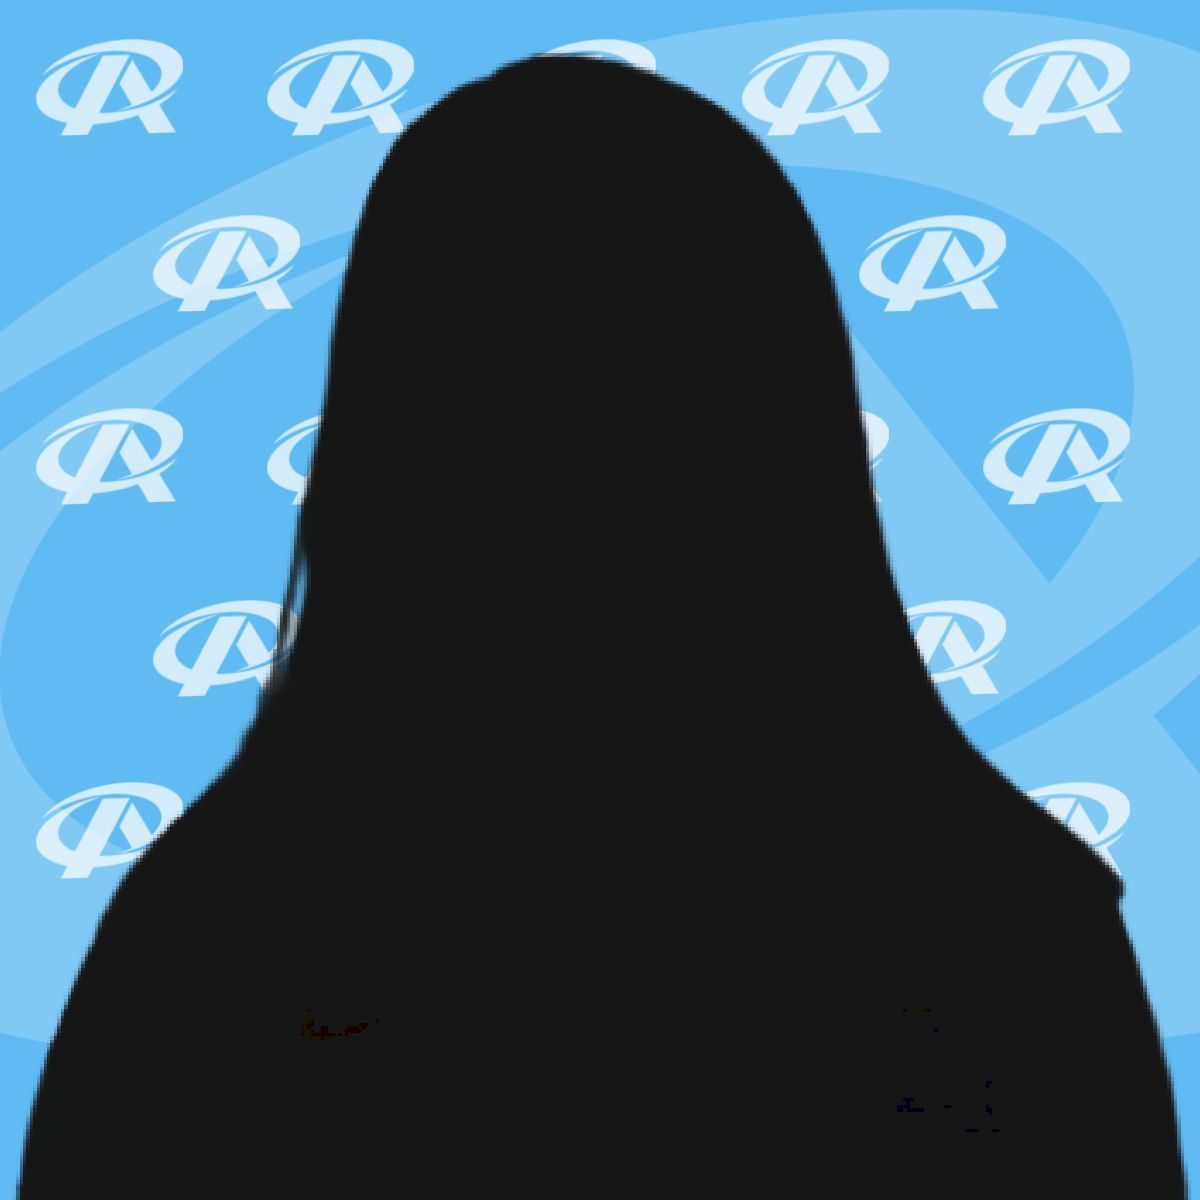 A silhouette of a woman against a blue background with the letter r on it